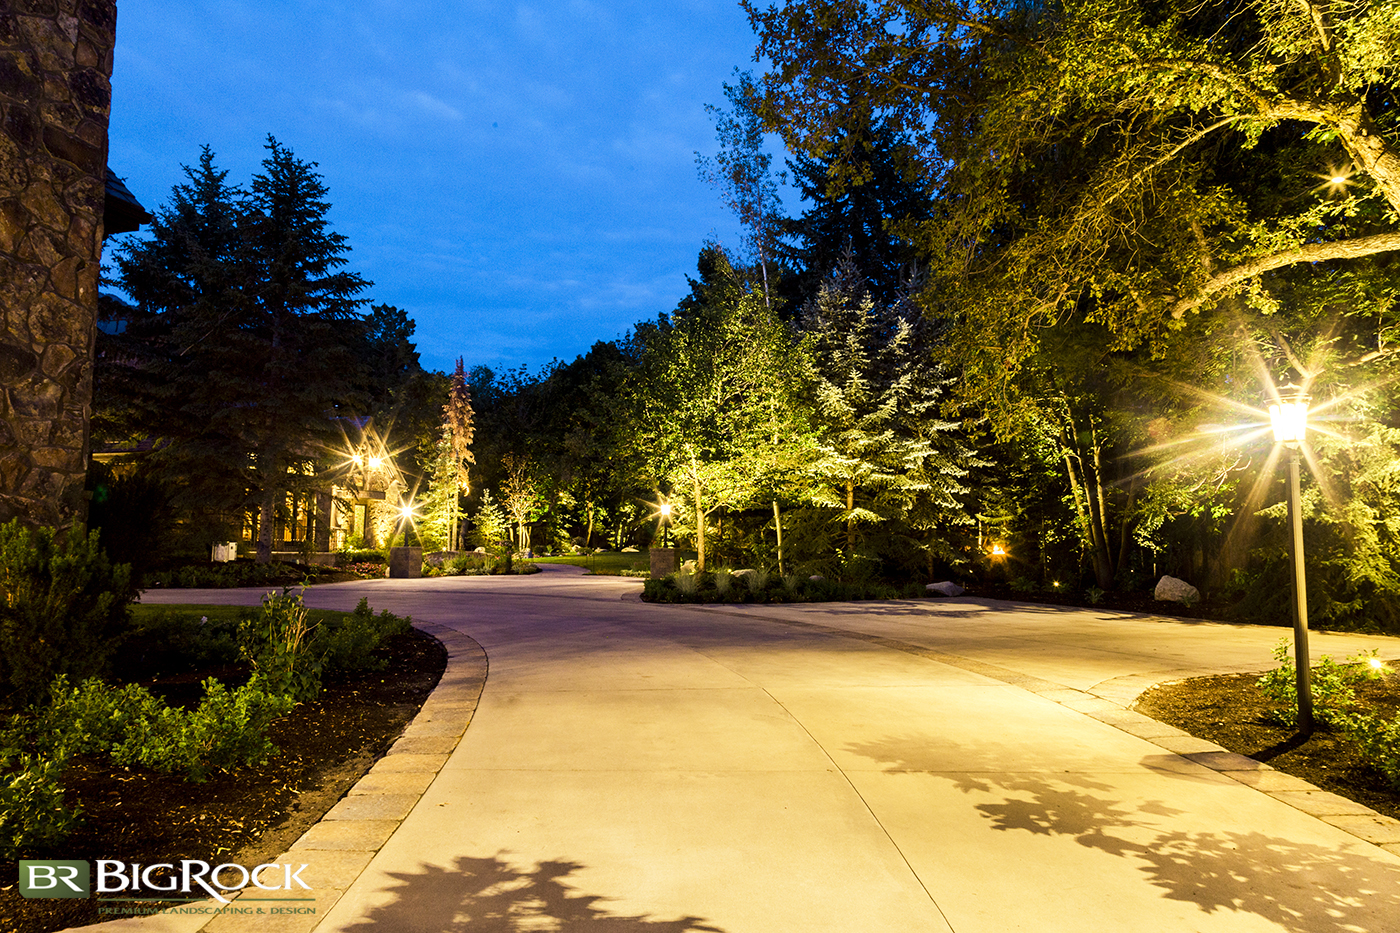 Did you know that landscape lighting can add a little extra curb appeal or create an inviting atmosphere for gatherings with friends and family? We are passionate about all things landscaping and are here to share some of our favorite landscaping lighting ideas!